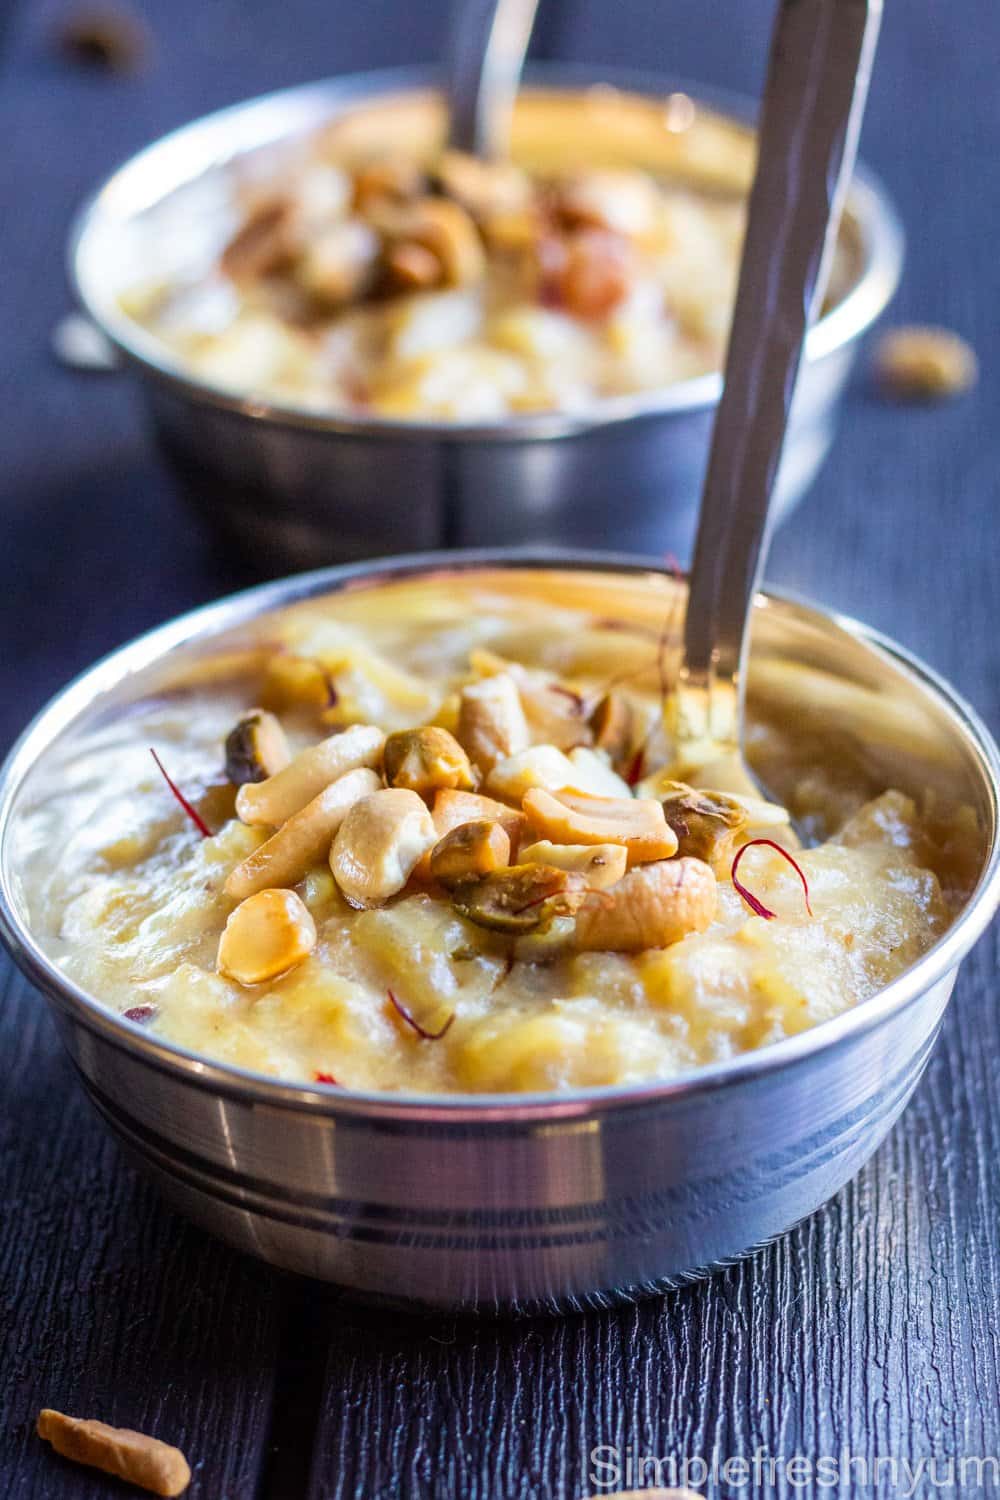 Instant pot rice kheer in silver color serving bowls garnished with nuts and saffron on top.